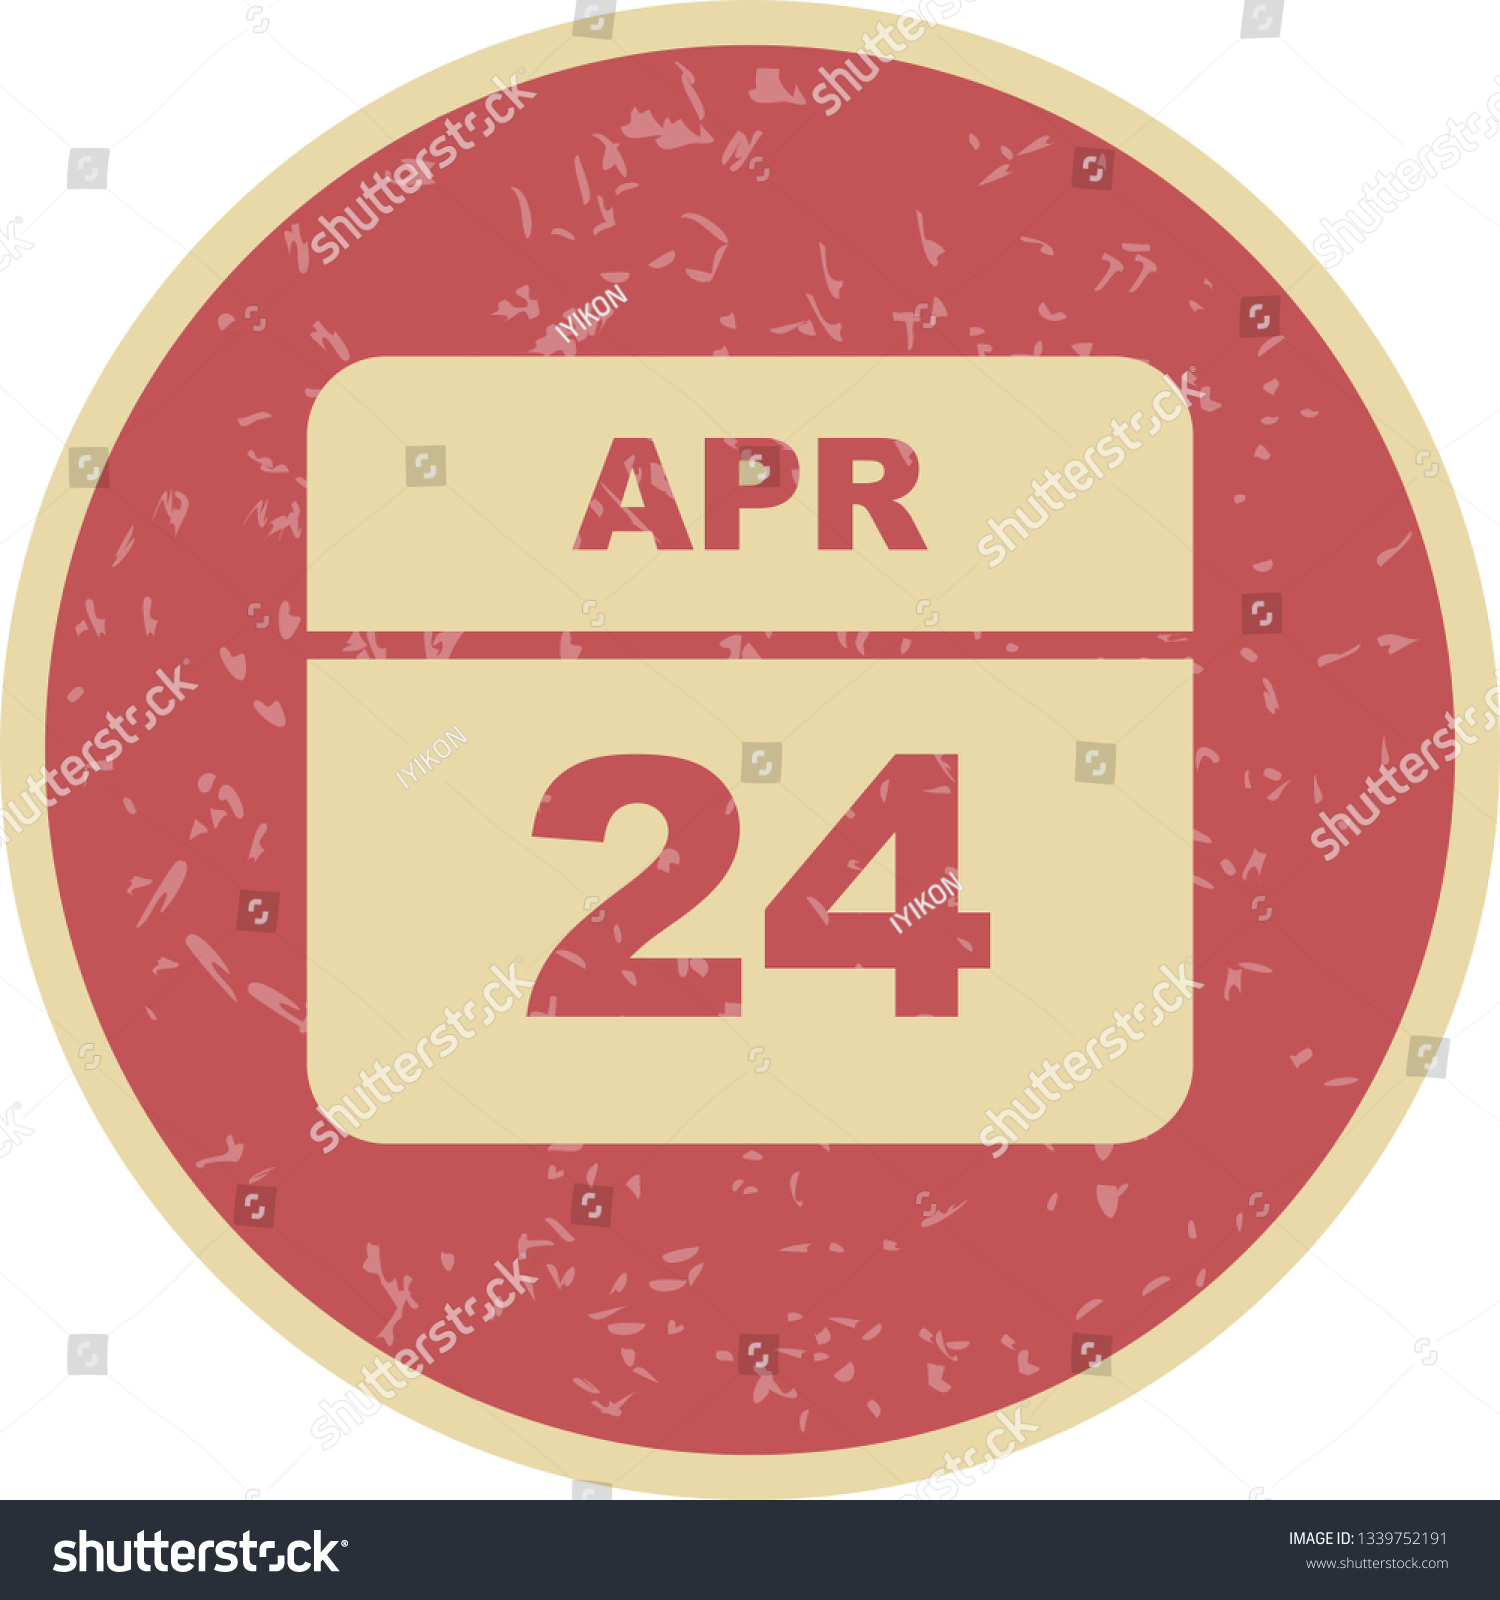 April 24th Date on a Single Day Calendar Royalty Free Stock Photo